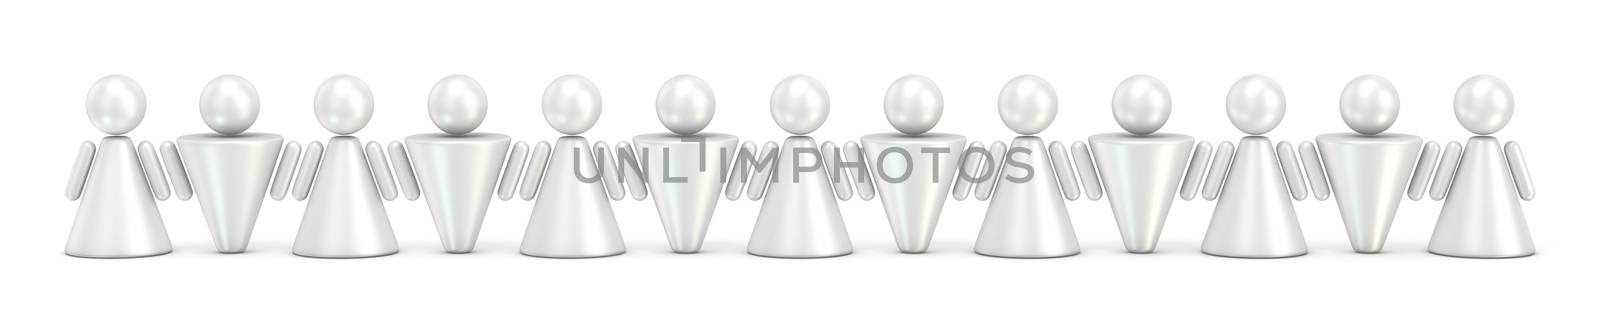 Abstract symbol people figures in row. 3D render illustration isolated on white background